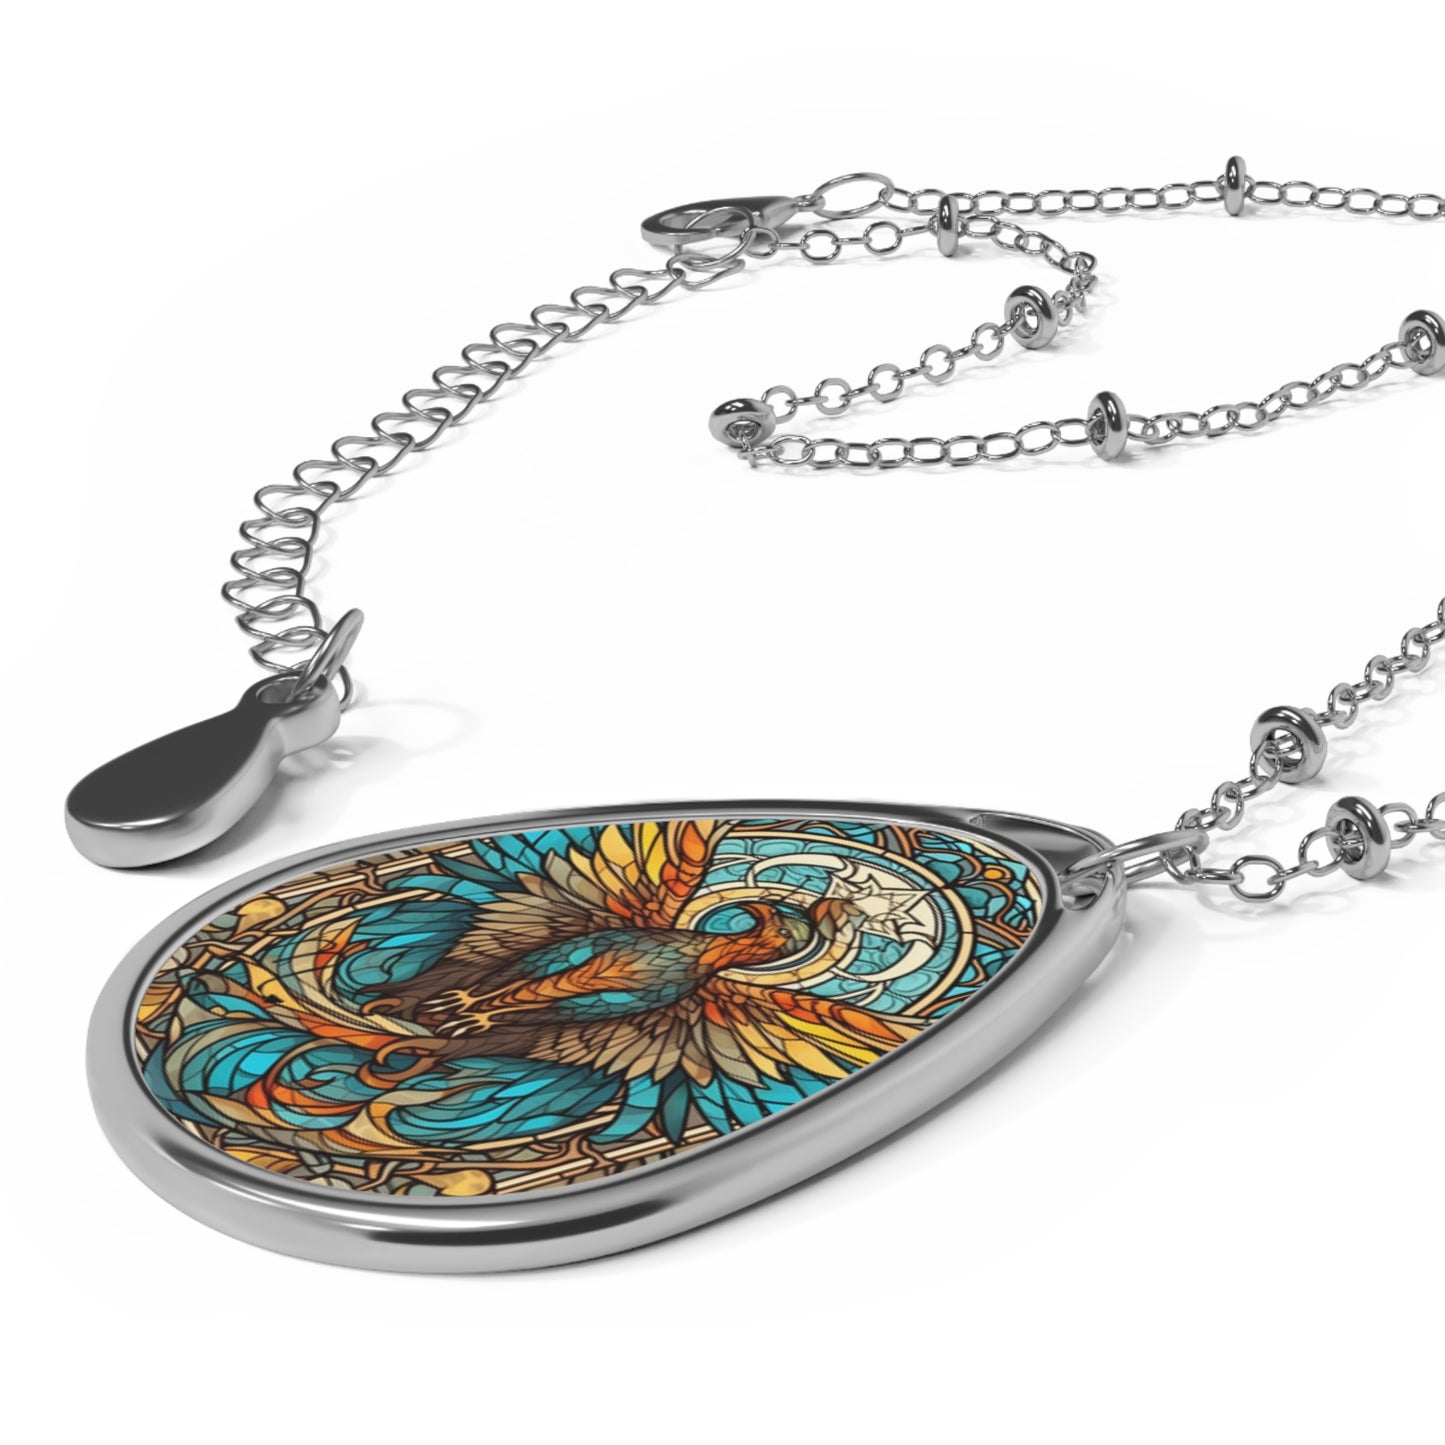 Scorpio Zodiac Sign ~ Scorpio Phoenix Rising Stained Glass Illustration ~ Necklace & Oval Pendant With Chain